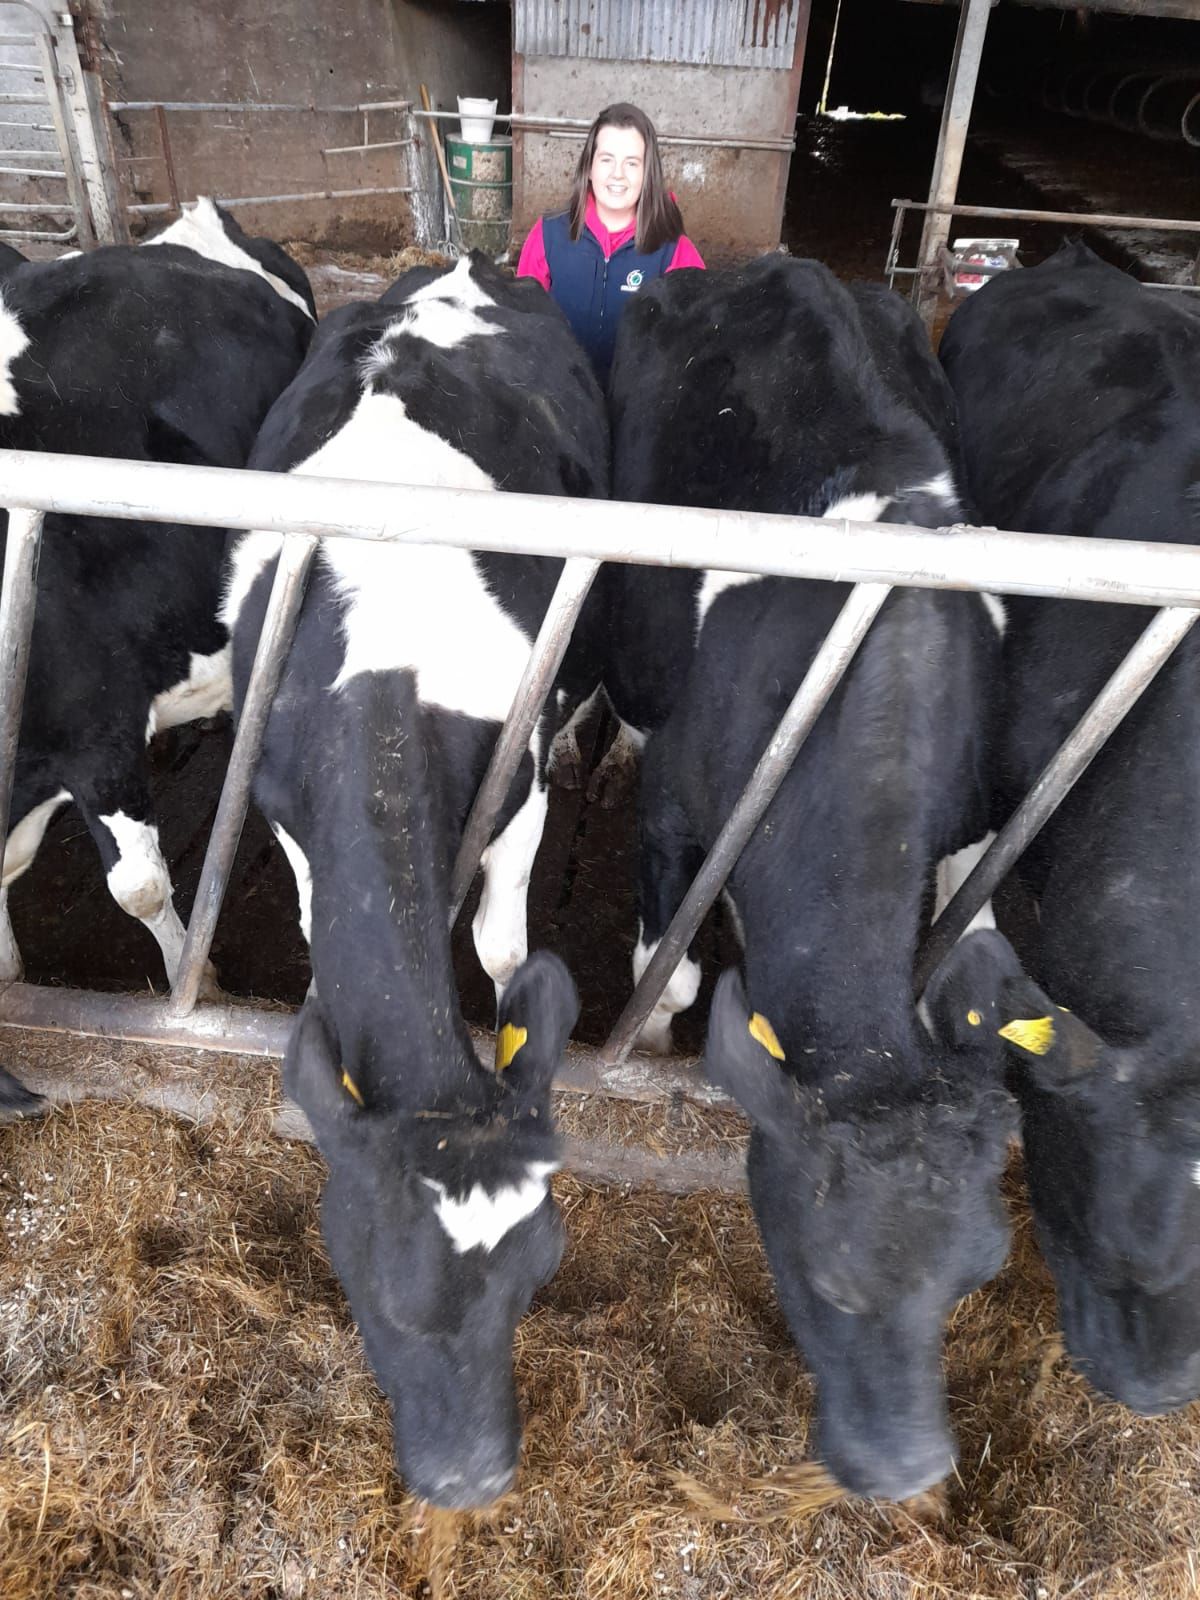 Friesian cows, dairy, dairy farming, livestock buildings, cows, cattle, dairy, sheds